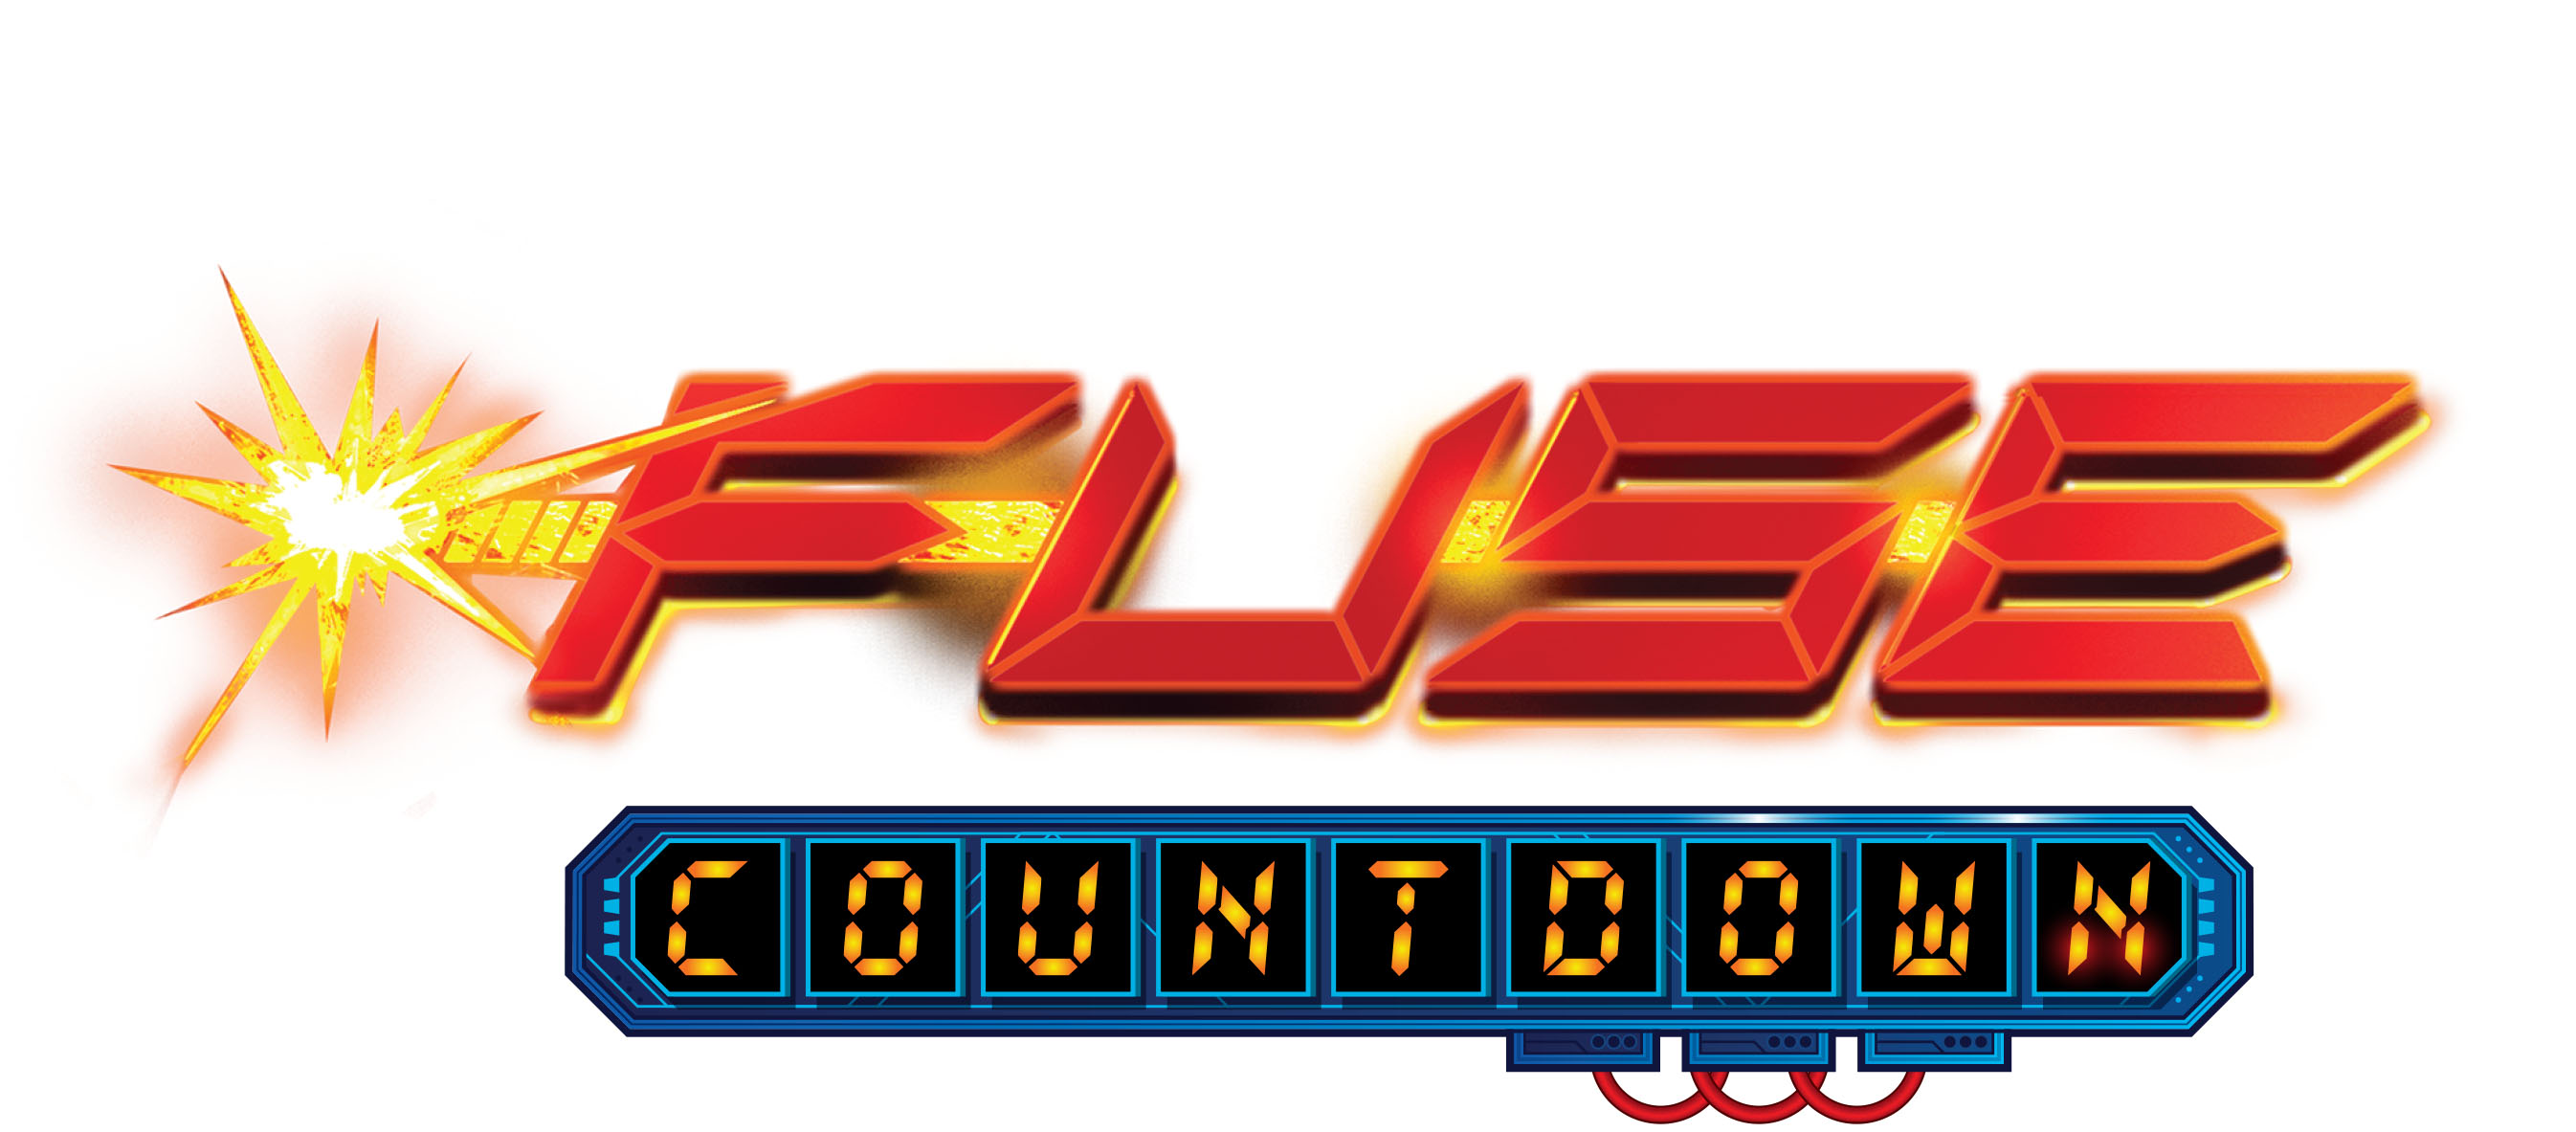 GTM #267 - Fuse Countdown!